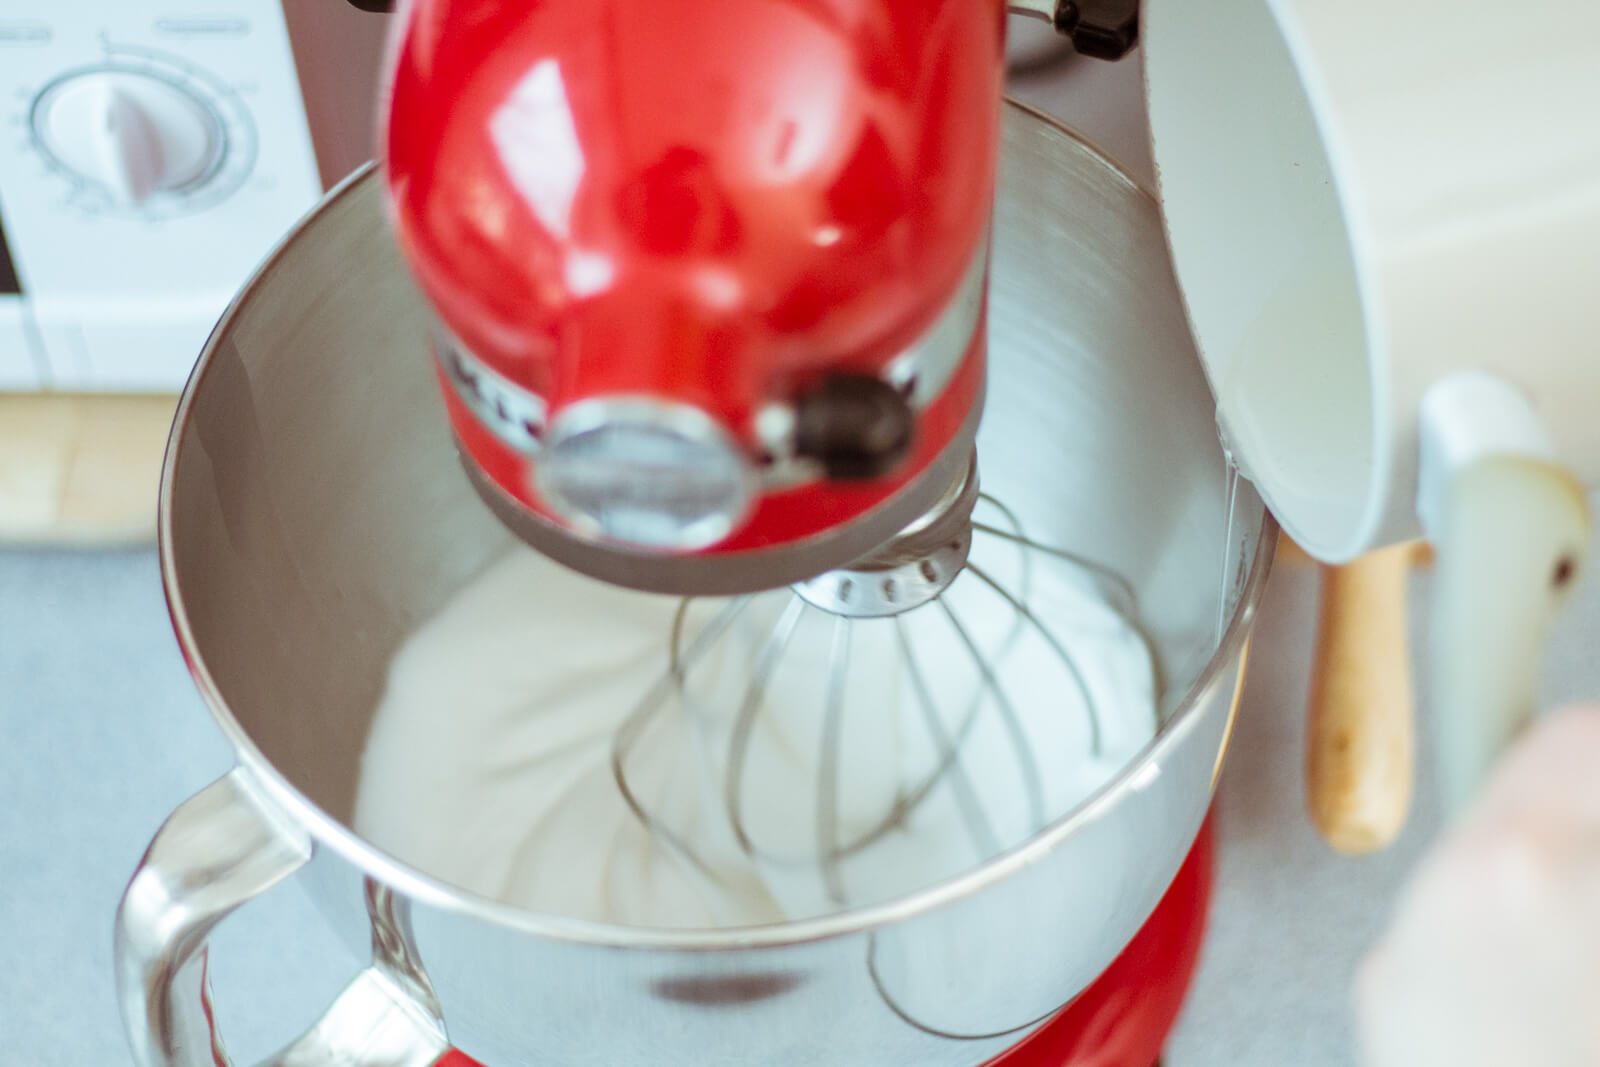 When the syrup reaches 116°C (240.8°F), slowly stream it down the side of a stand mixer bowl.